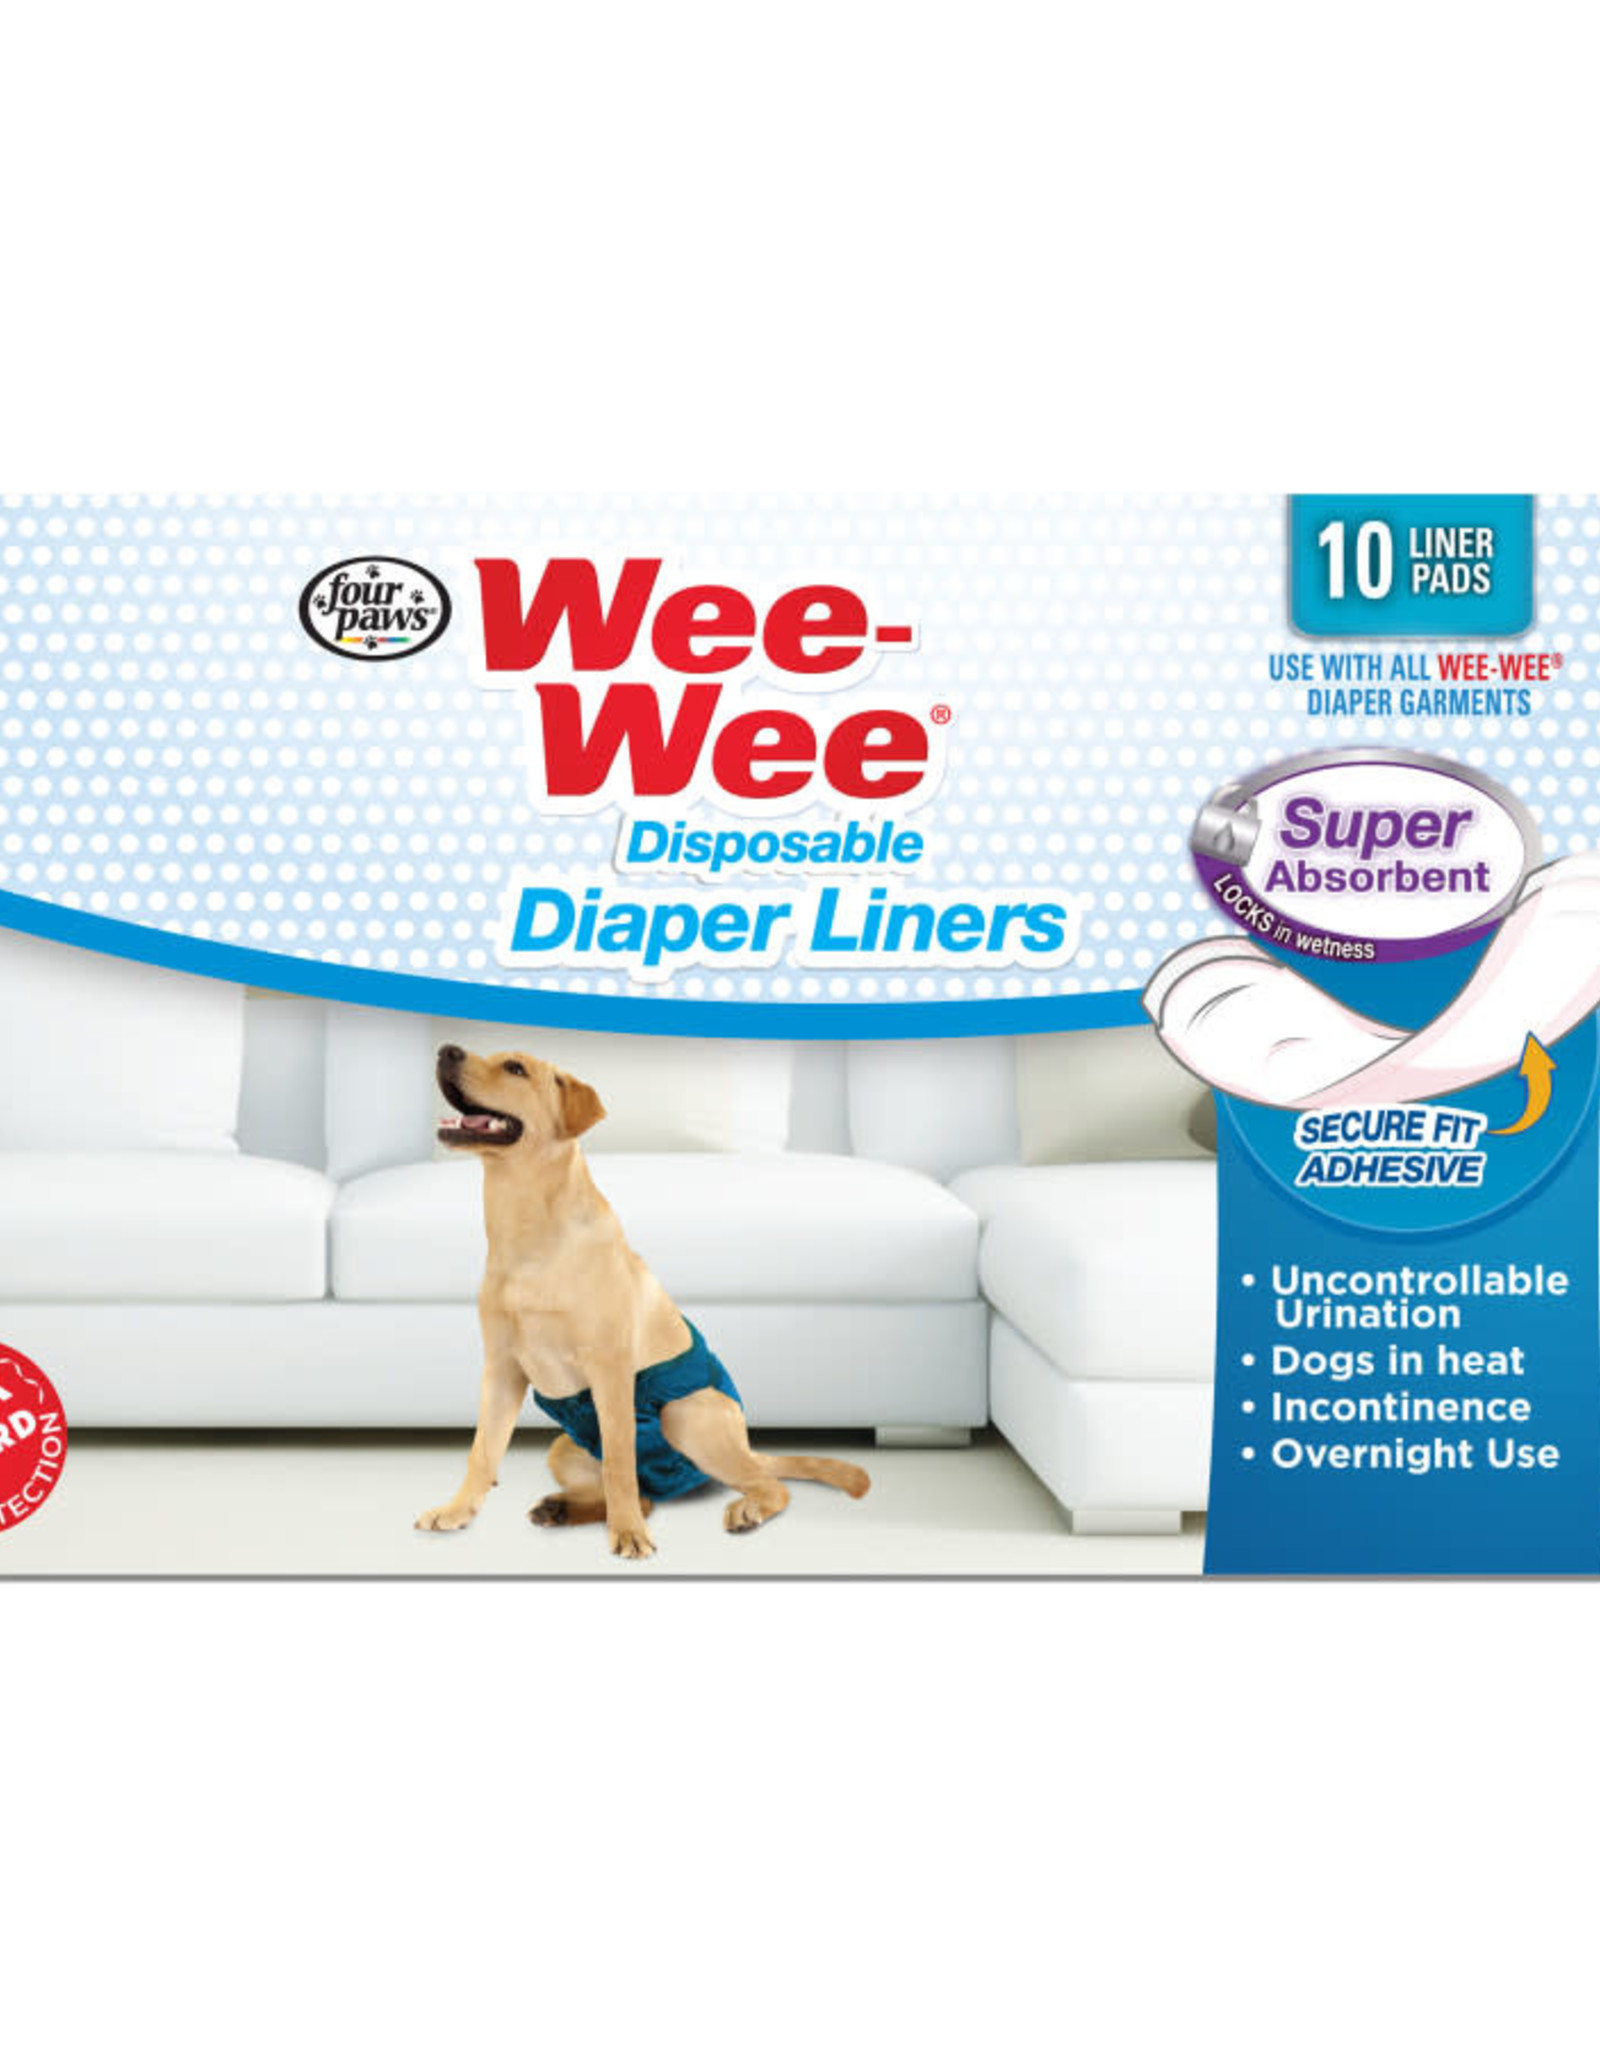 FOUR PAWS PET PRODUCTS Four Paws Wee-Wee Super Absorbent Disposable Dog Diaper Liners 10 Count